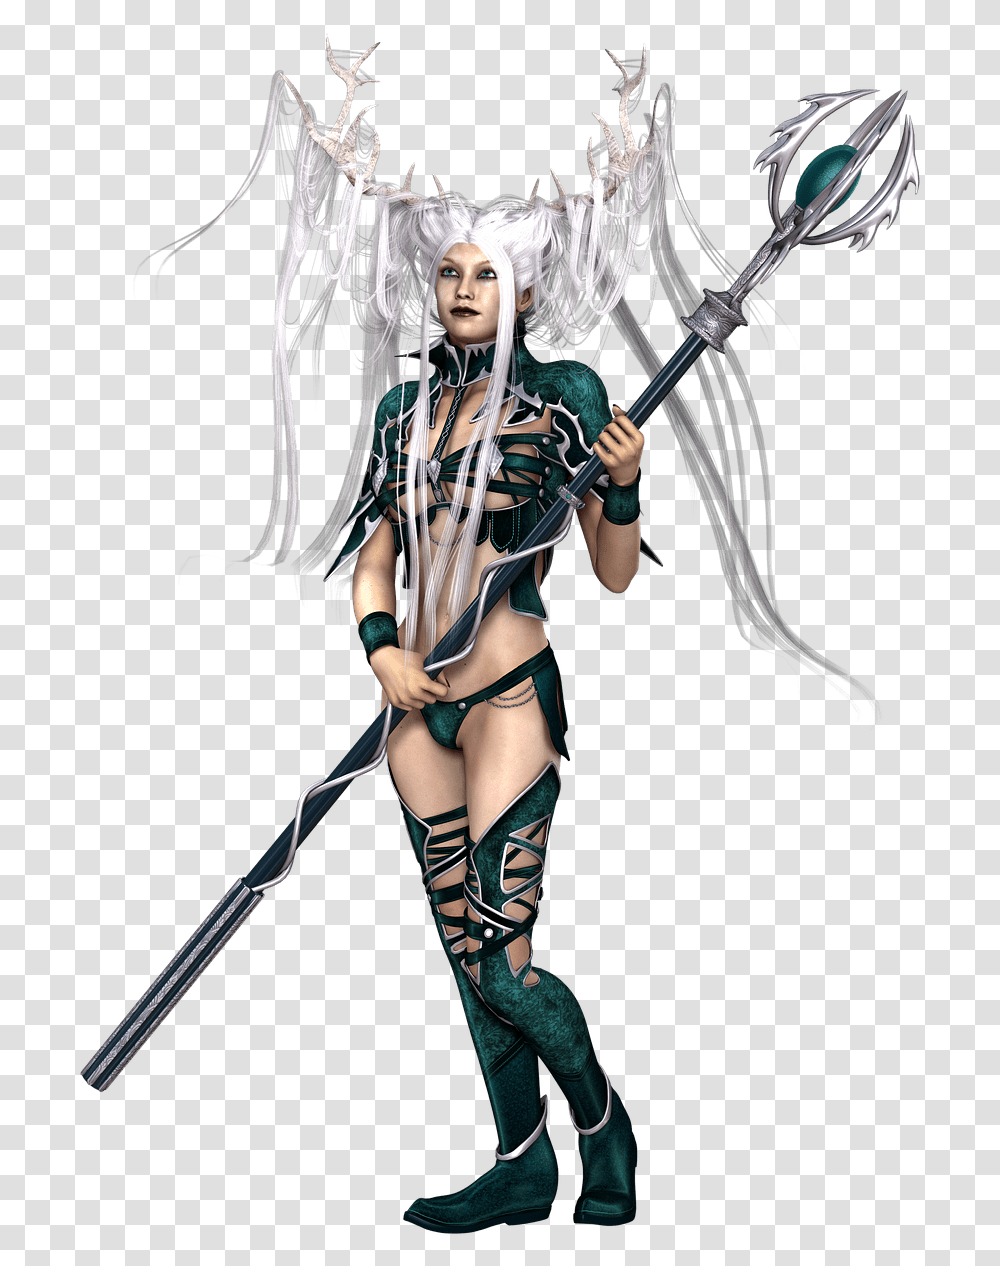 Woman White Reindeer Hairstyle Clip Arts Female Warrior, Person, Costume, Elf, Weapon Transparent Png